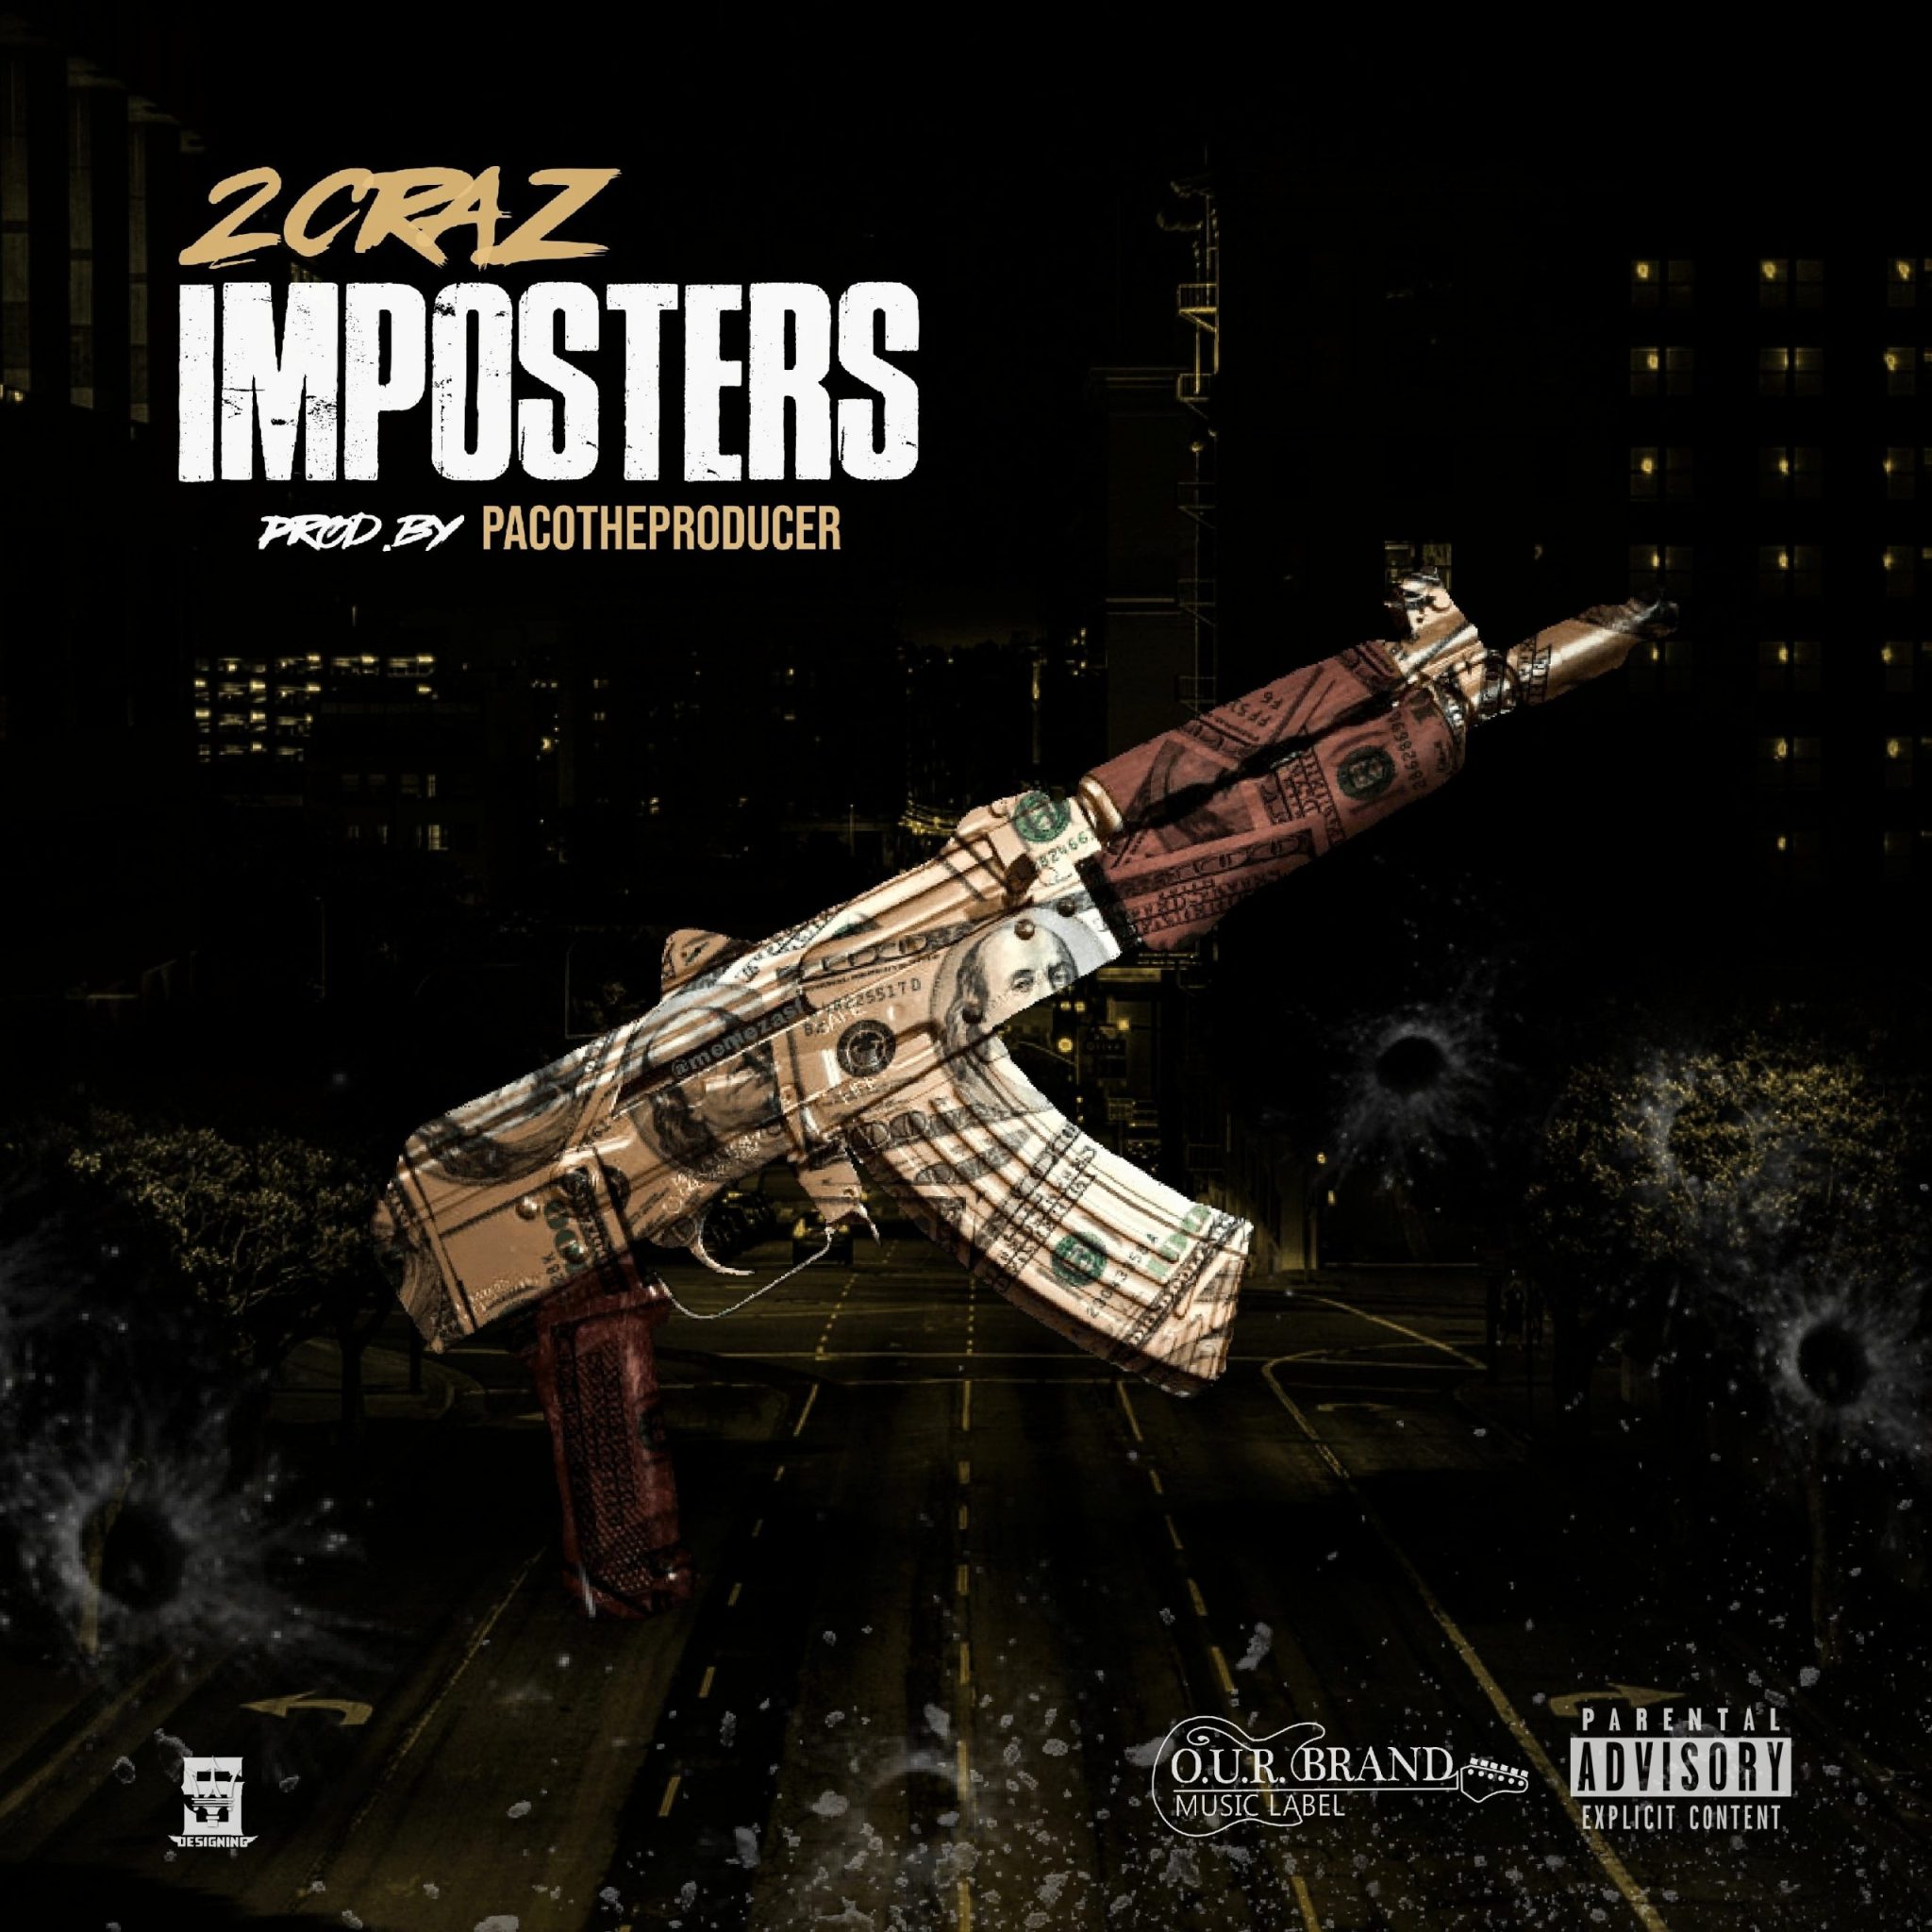 New Song: "Imposter" - 2CraZ